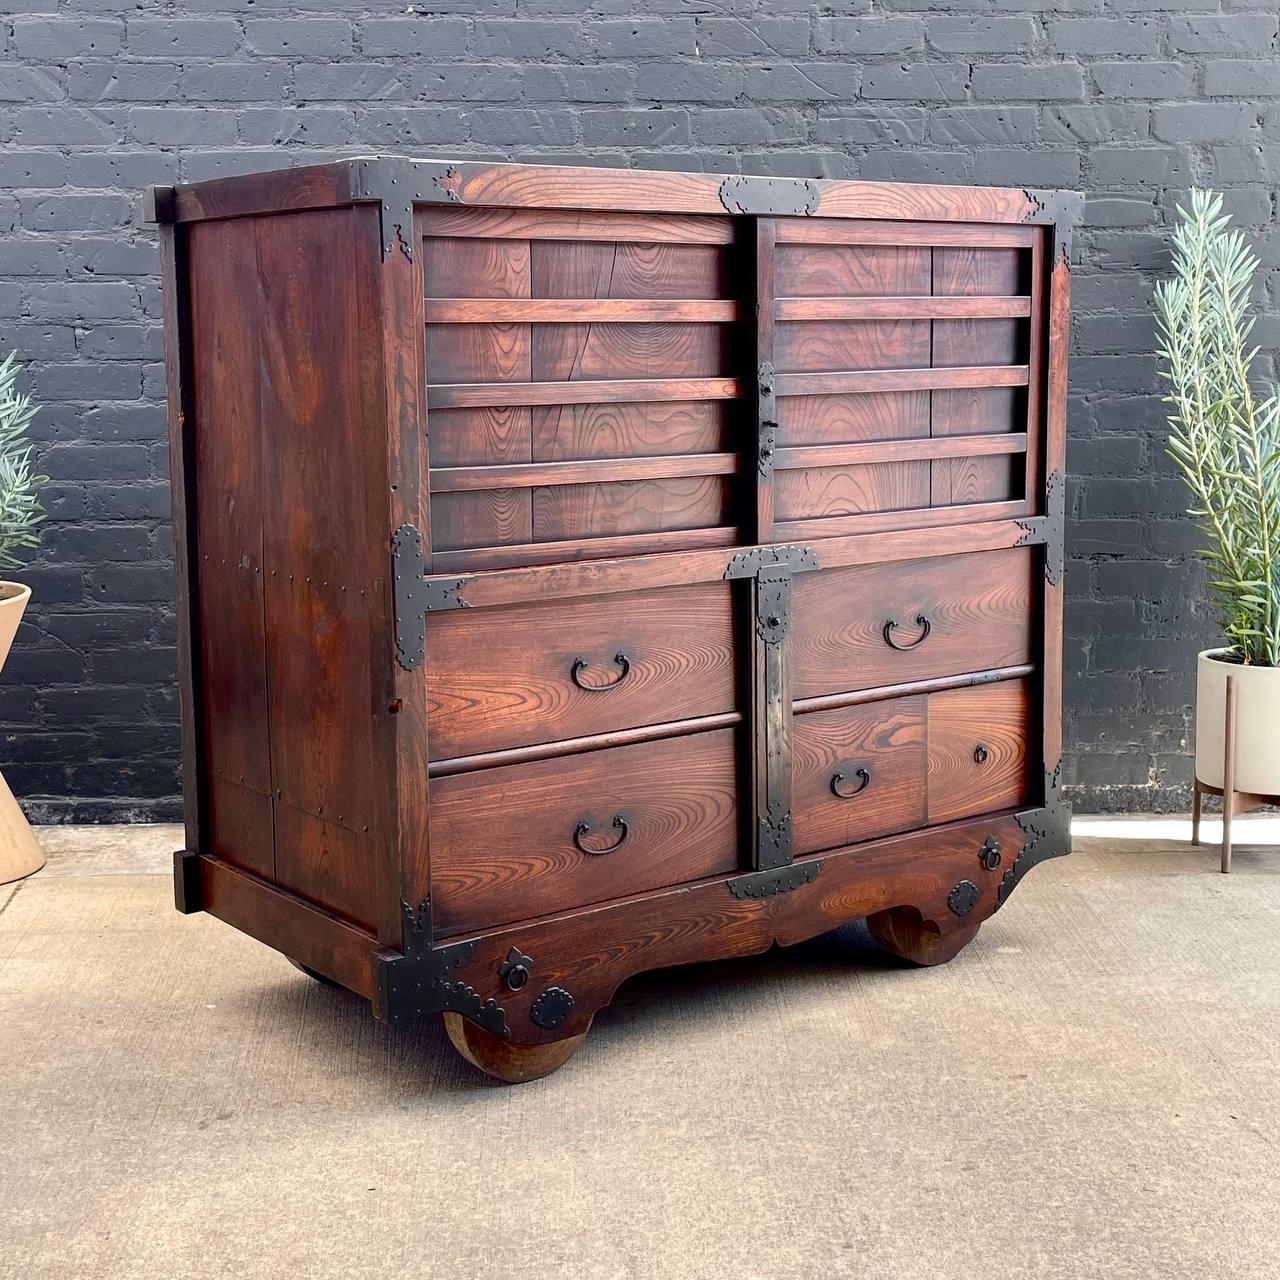 Antique Late 1800’s Japanese Rolling Tansu Chest of Drawers Dresser 

Country: Japan
Materials: Wood, Iron
Condition: Original Condition
Style: Japanese Antique
Year: 1890’s

$4,895

Dimensions:
60”H x 62.50”W x 31.50”D